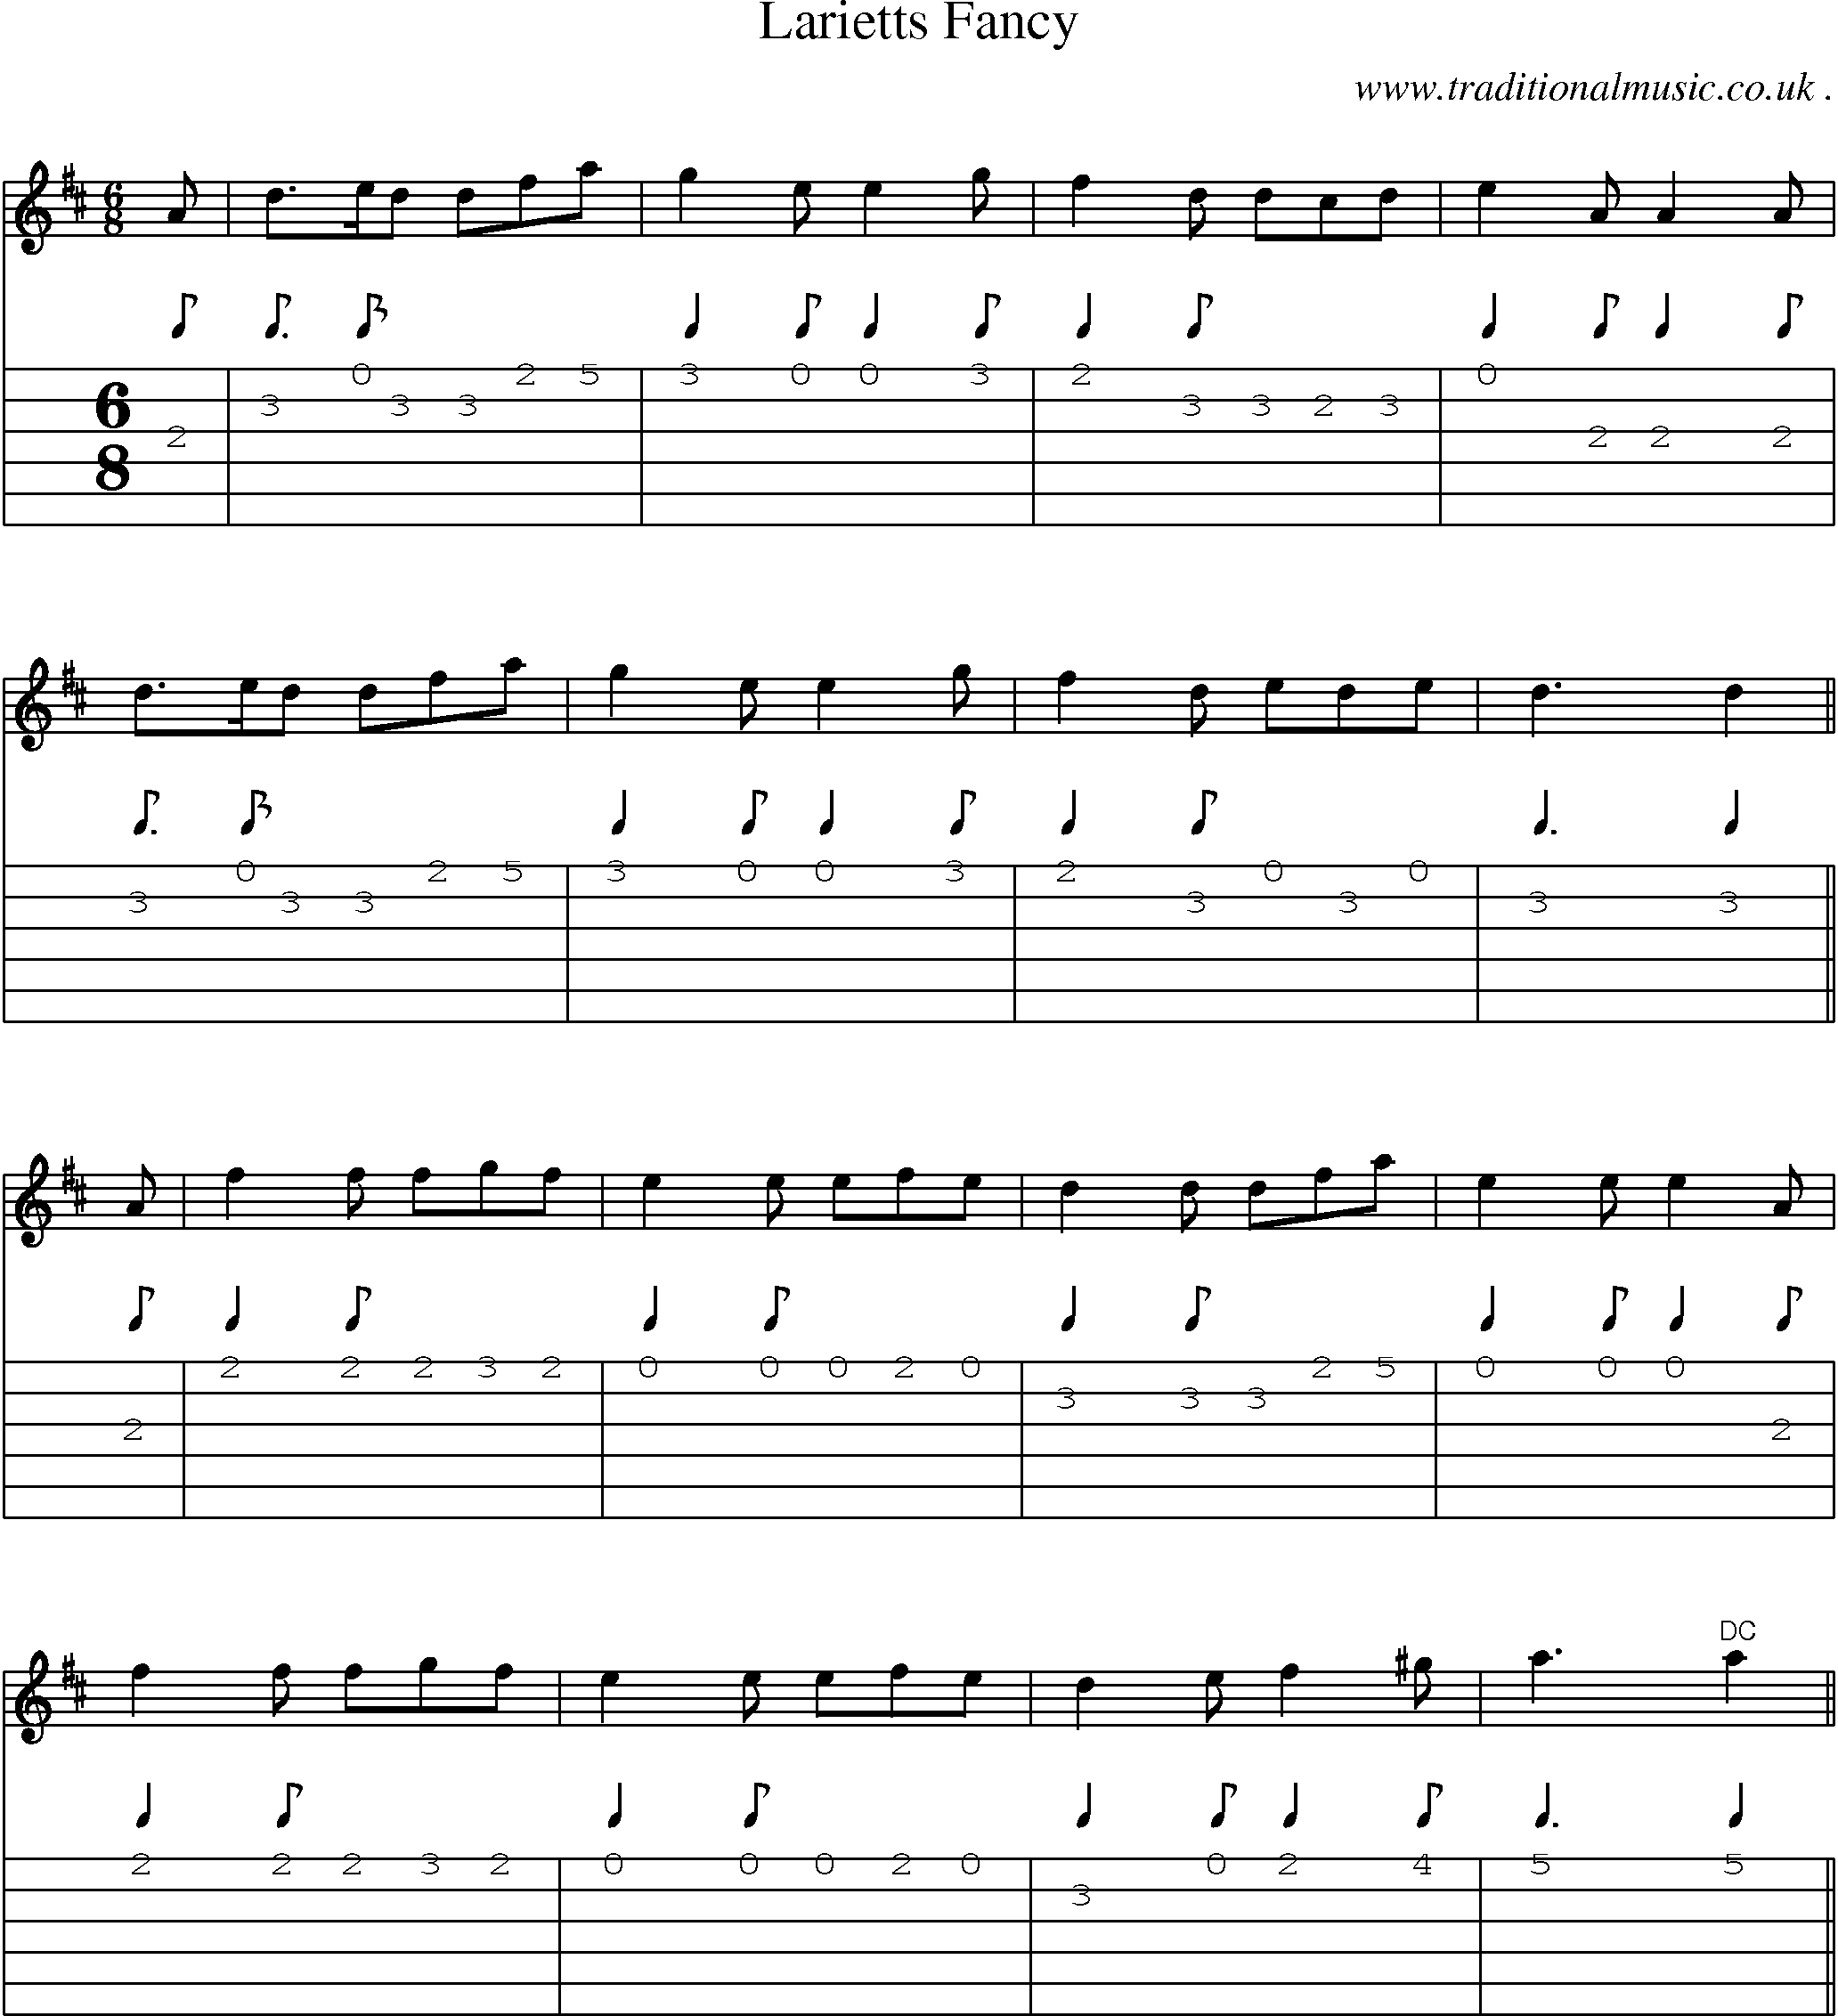 Sheet-Music and Guitar Tabs for Larietts Fancy